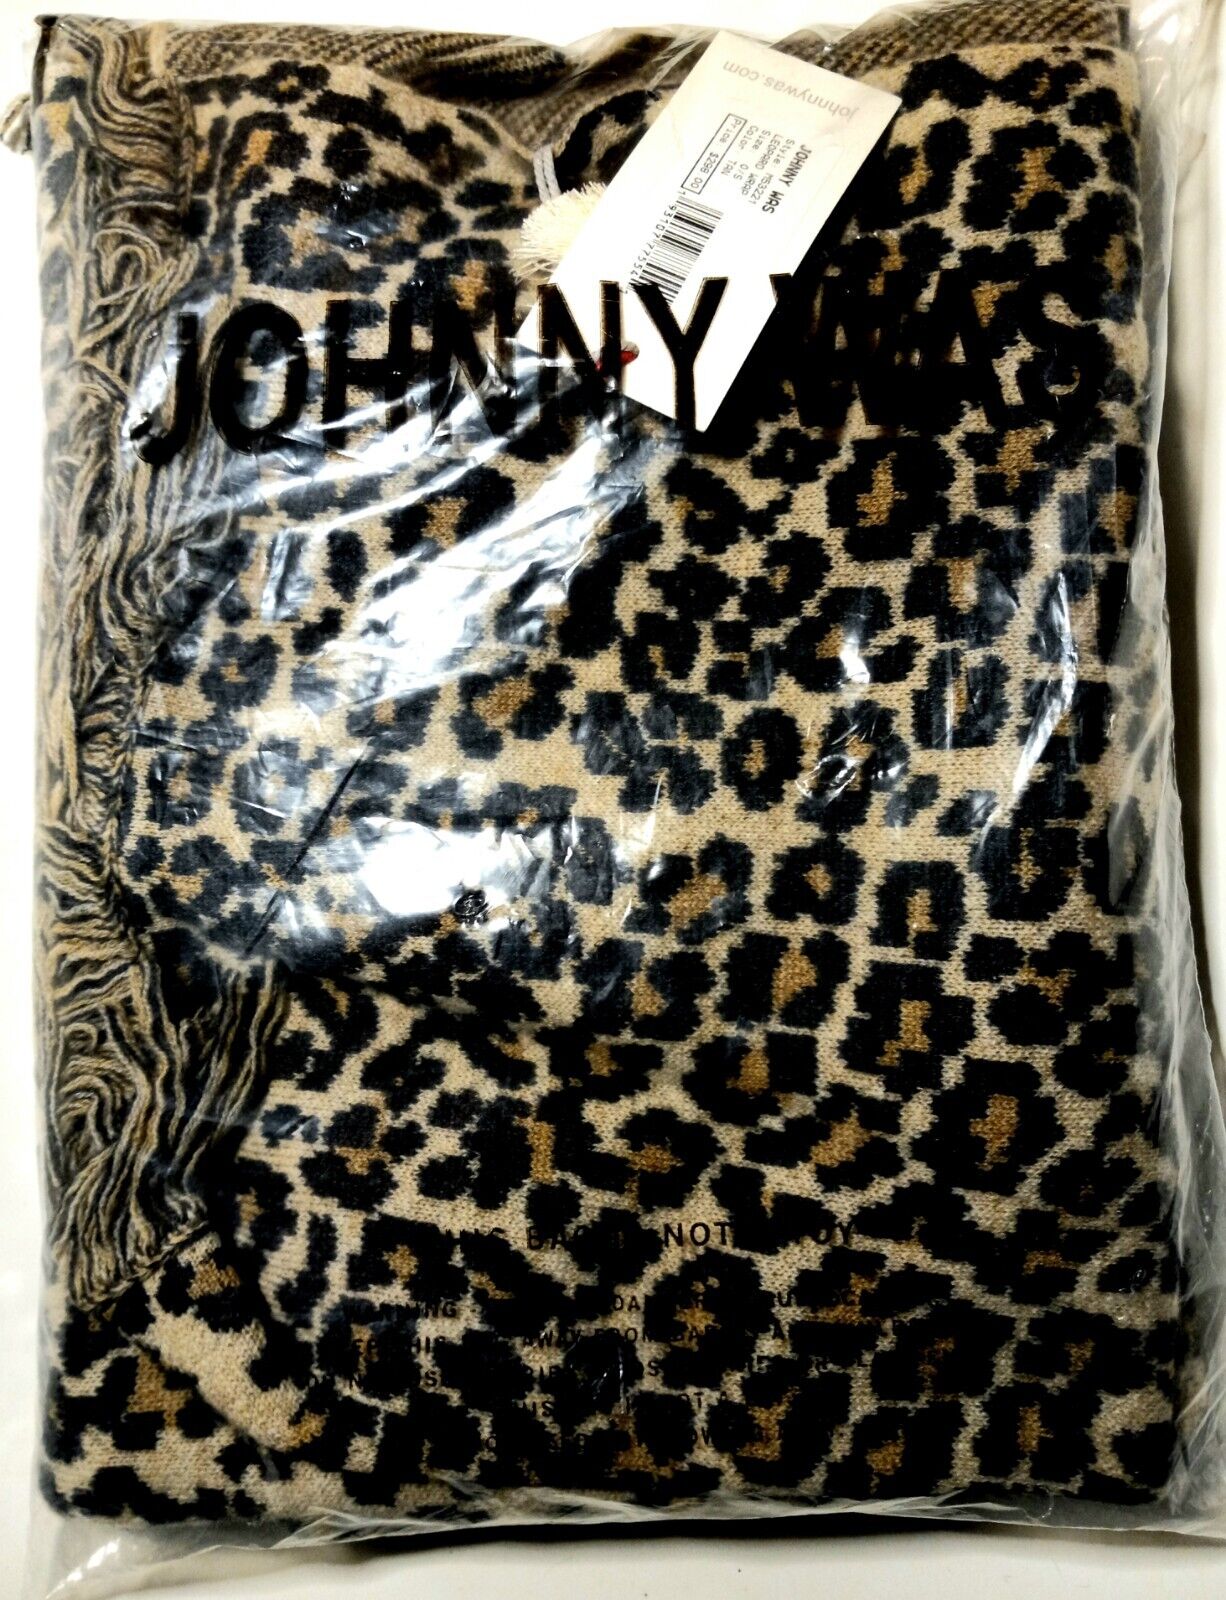 Johnny Was: Tan Leopard Wrap New With Tags In Bag